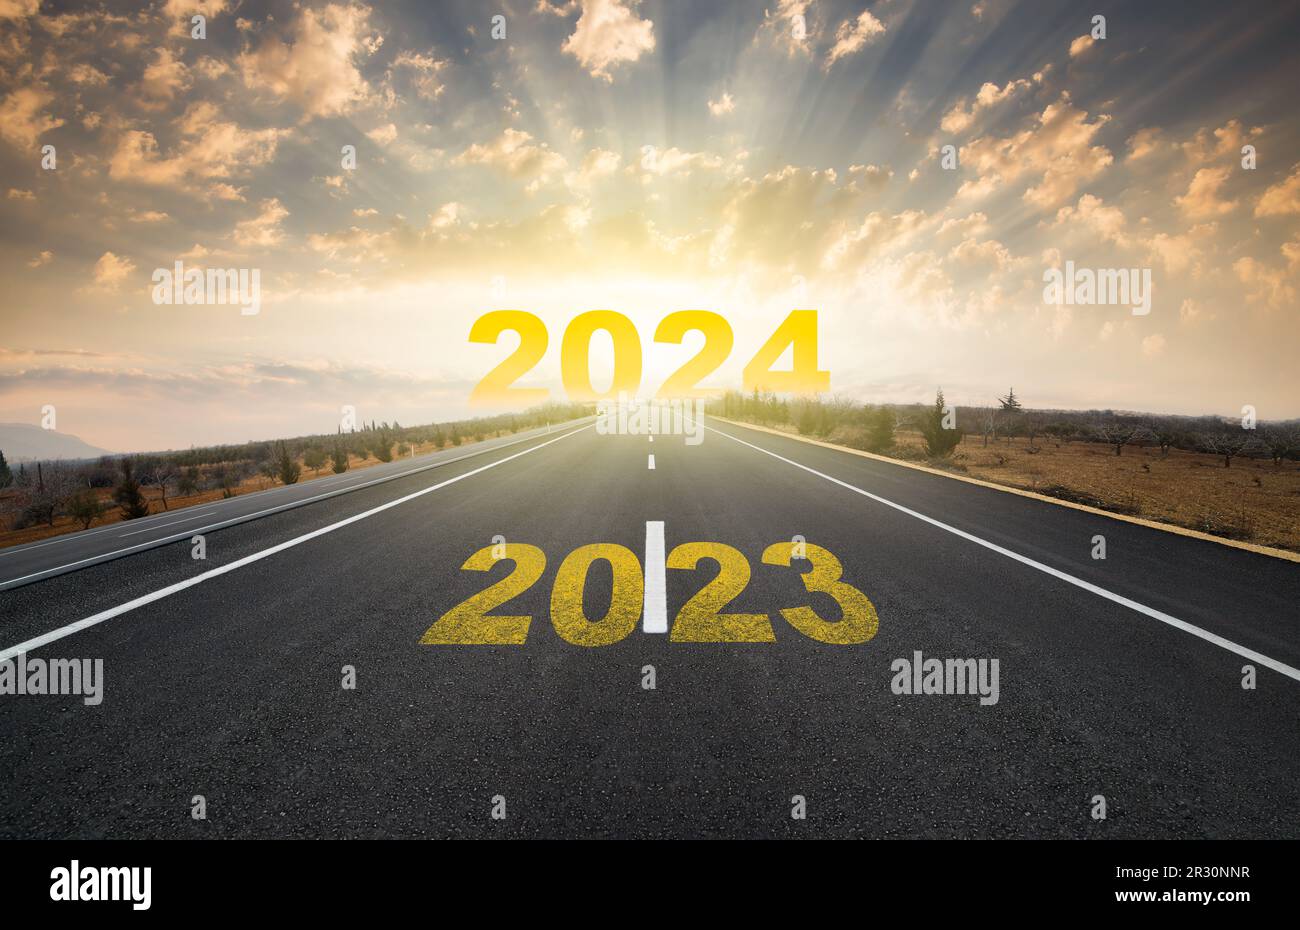 Change of calendar. 2024 anniversary. Transition from 2023 to the new year. Golden sunrise on asphalt empty road. New year concept Stock Photo